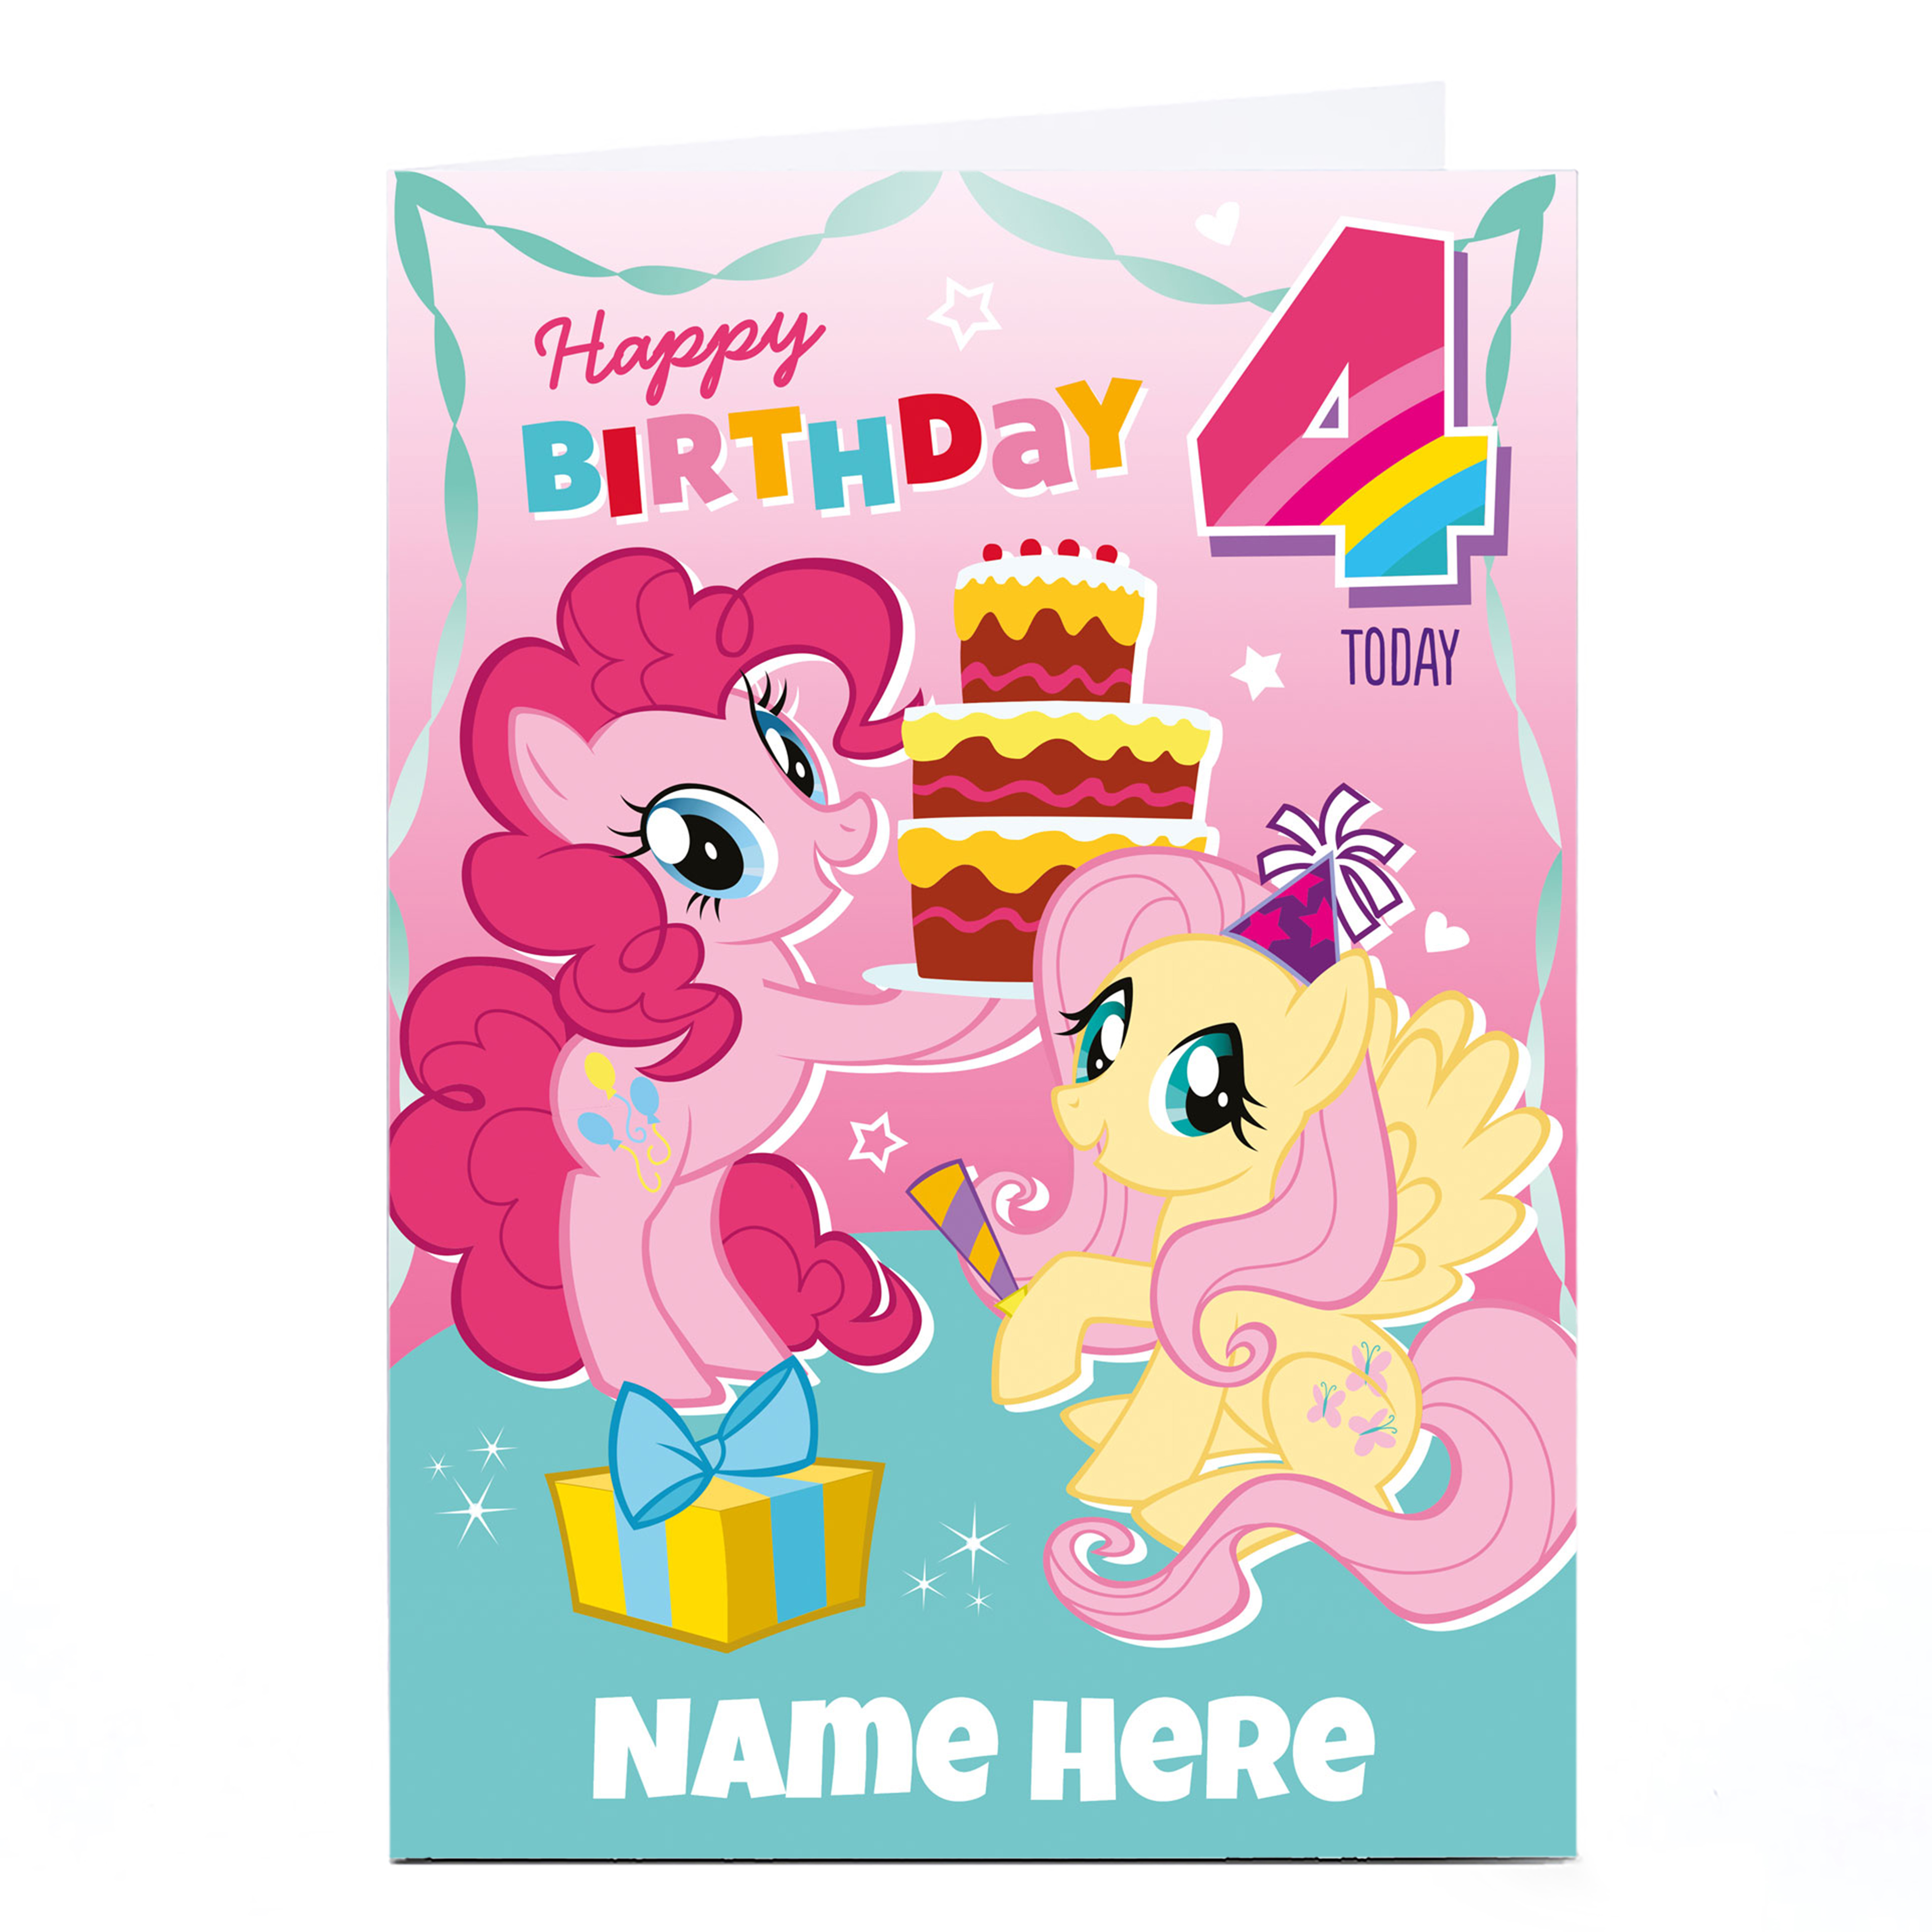 Personalised My Little Pony Card - 4 Today